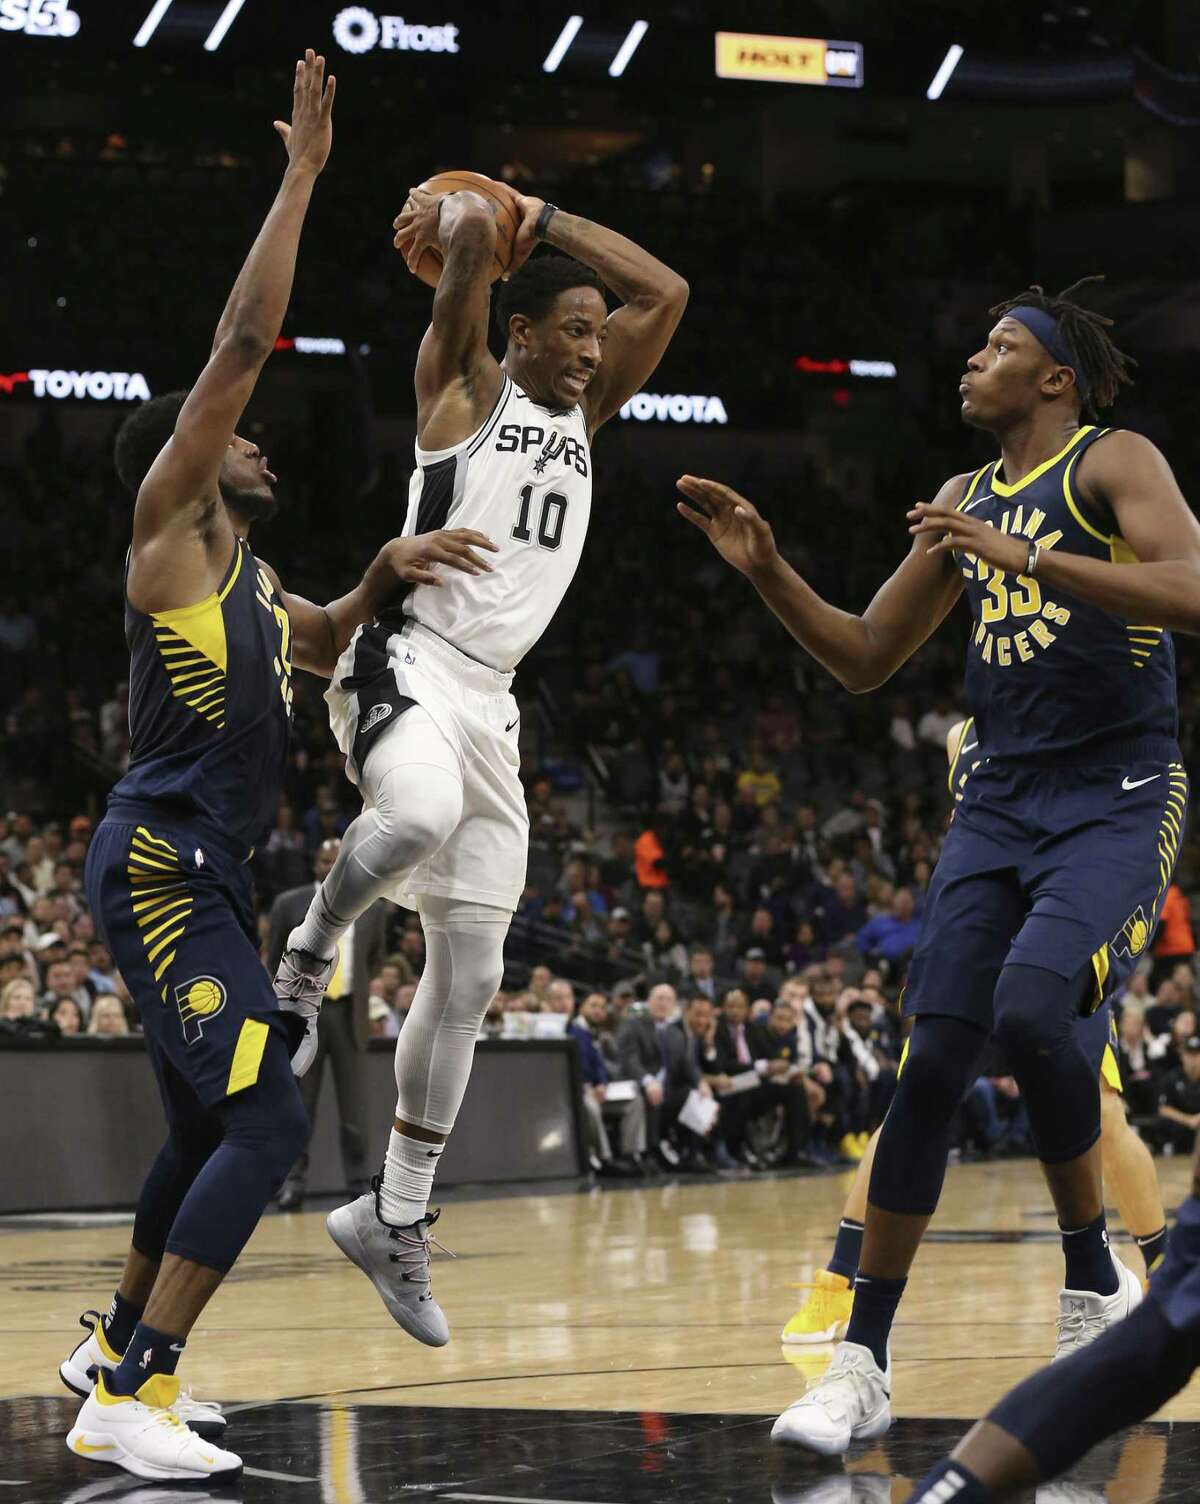 San Antonio Spurs?’ DeMar DeRozan passes the ball as Indiana Pacers?’ Thaddeus Young, left, and Myles Turner defend during the first half at the AT&T Center, Wednesday, Oct. 24, 2018.